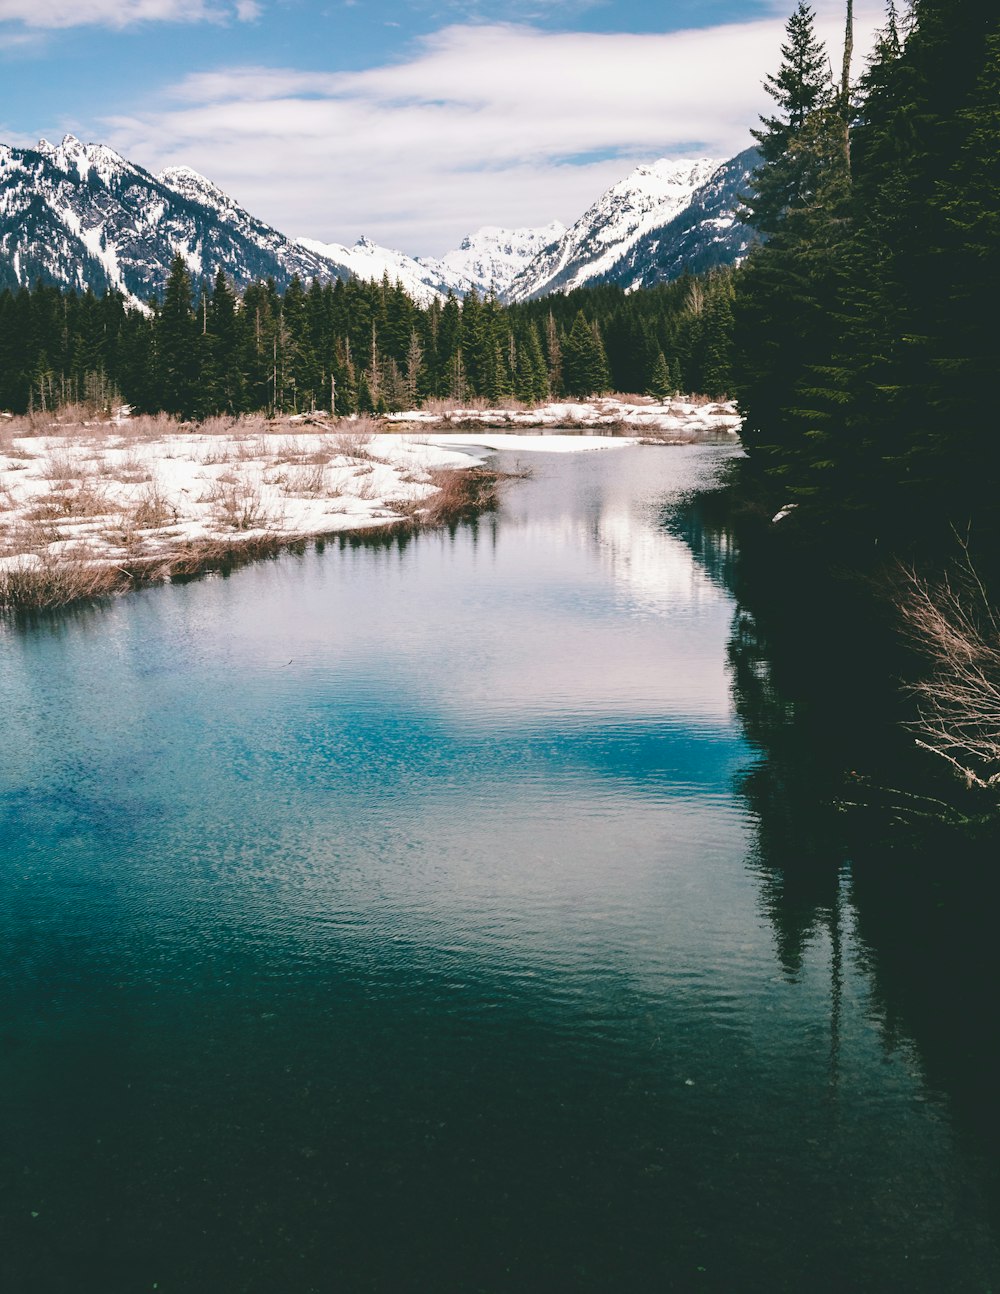 body of water near trees and mountain